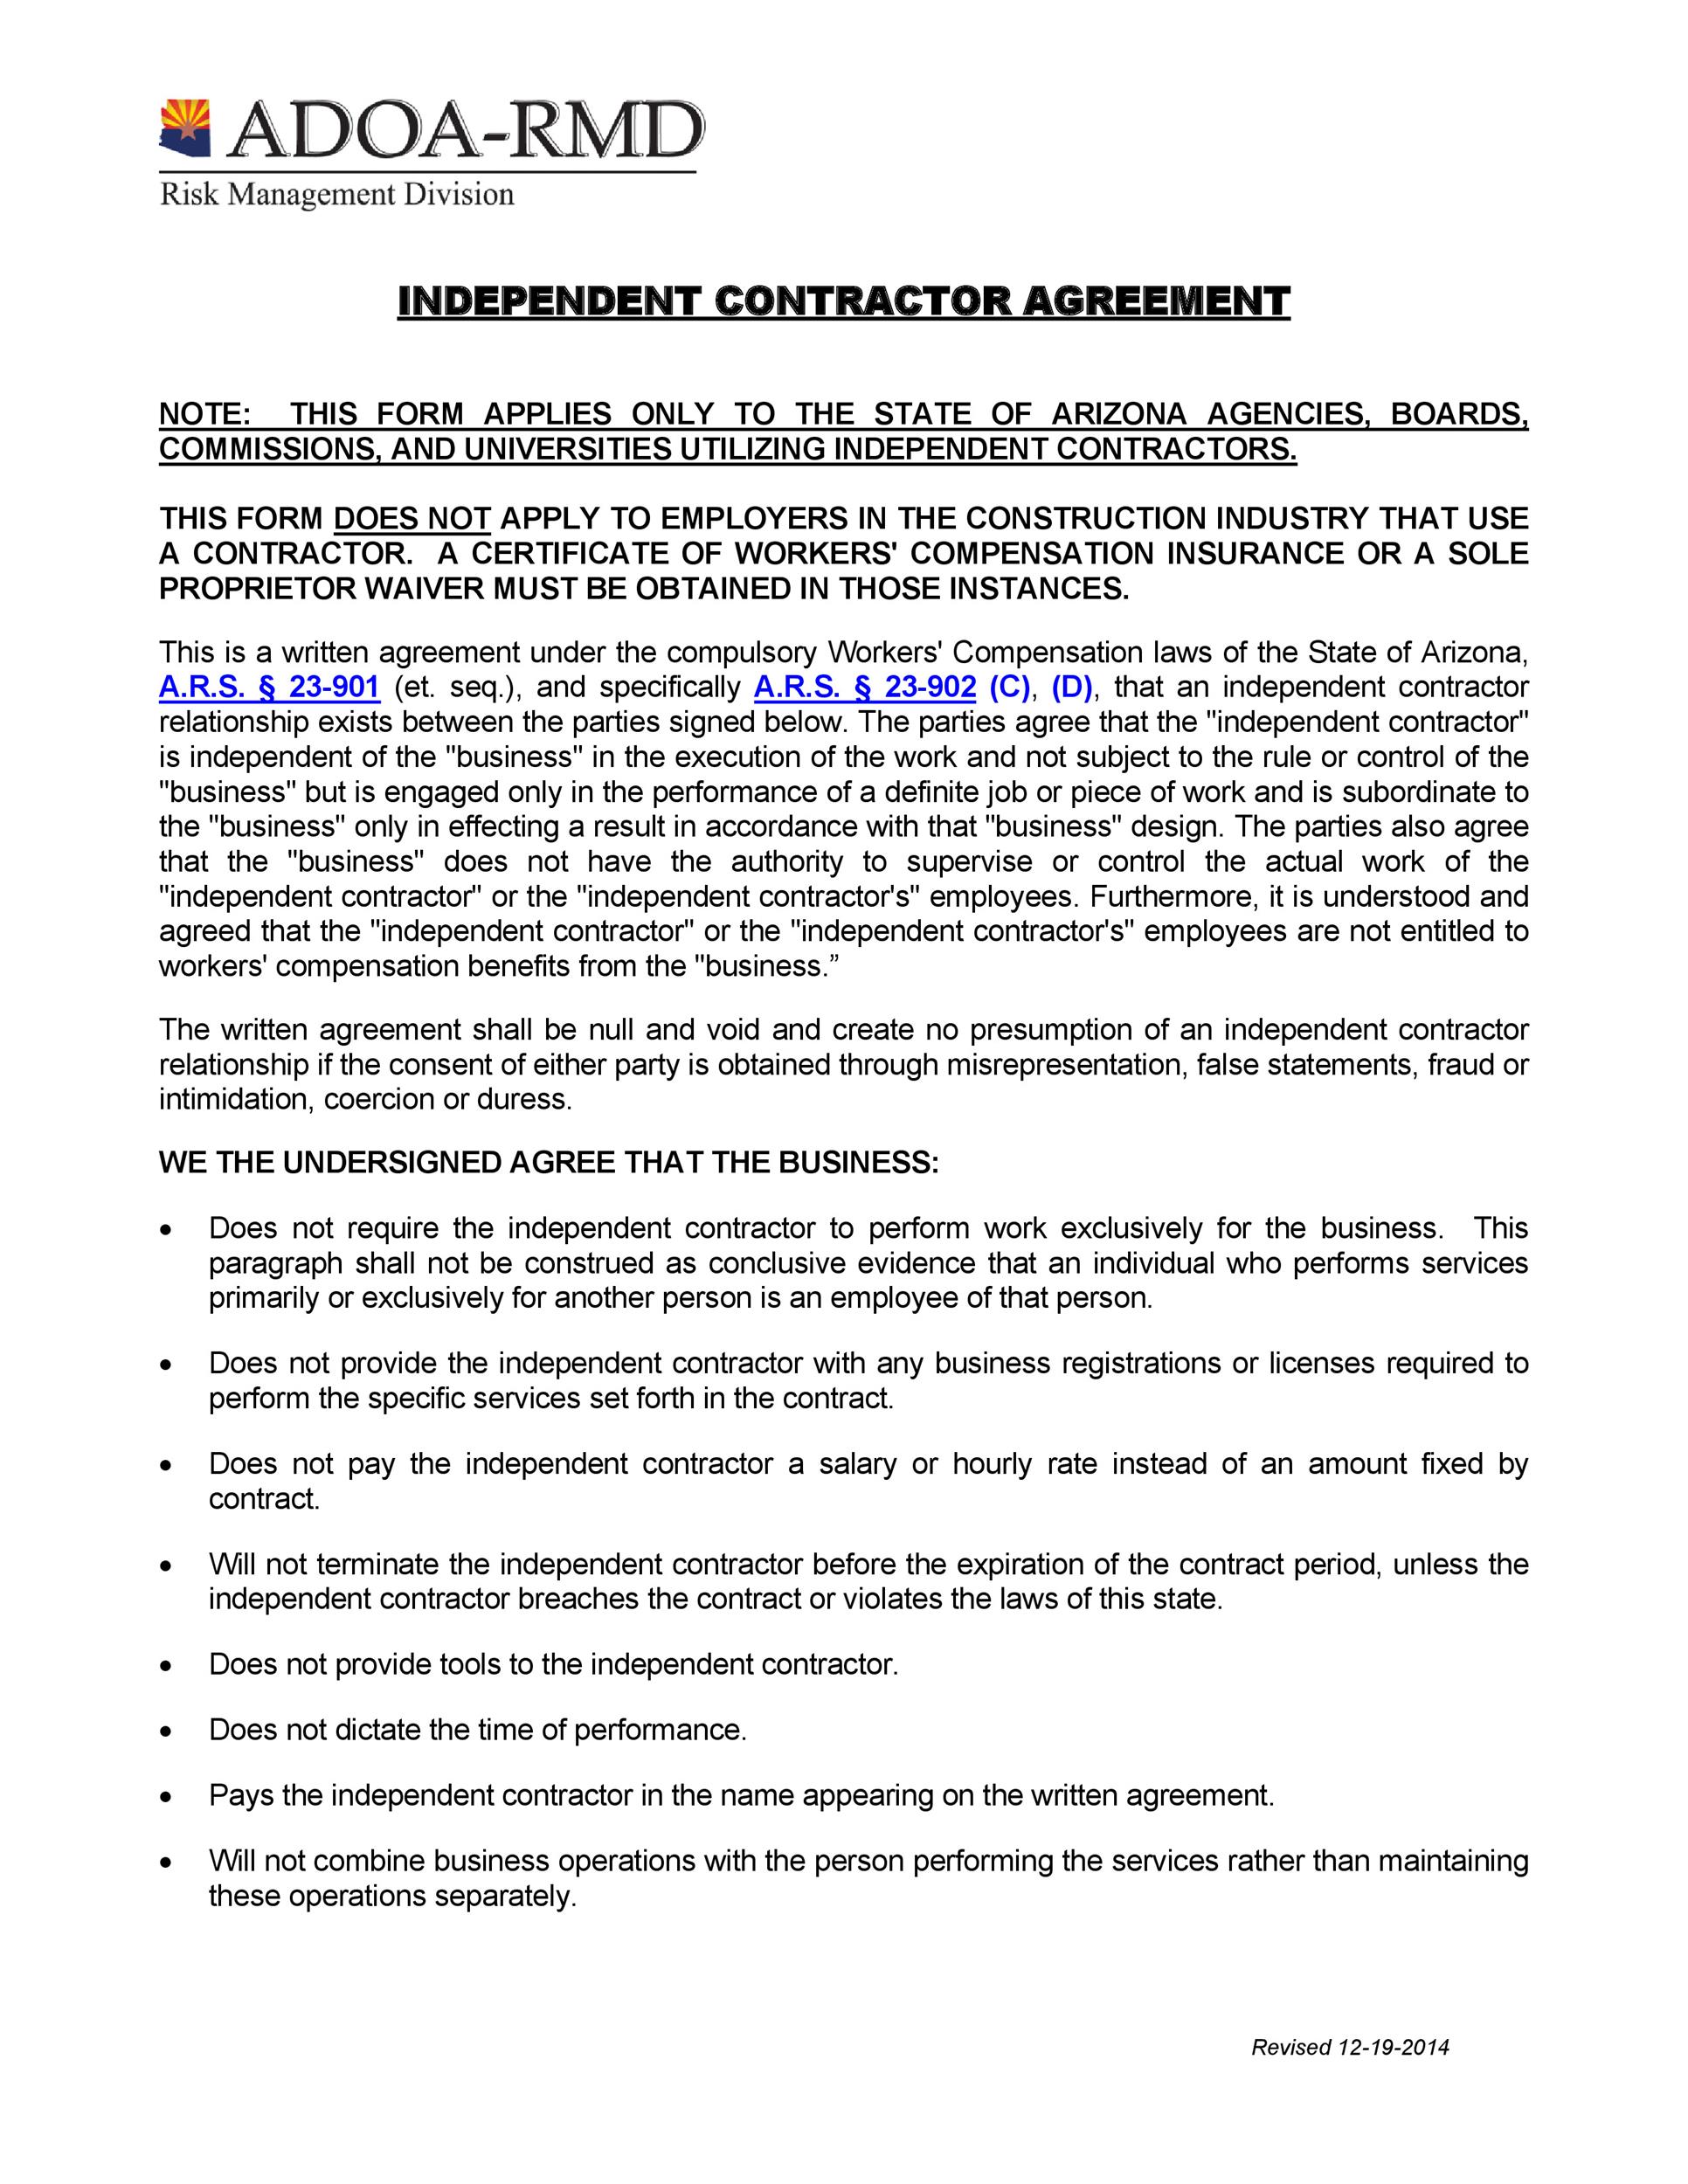 50+ FREE Independent Contractor Agreement Forms \u0026 Templates